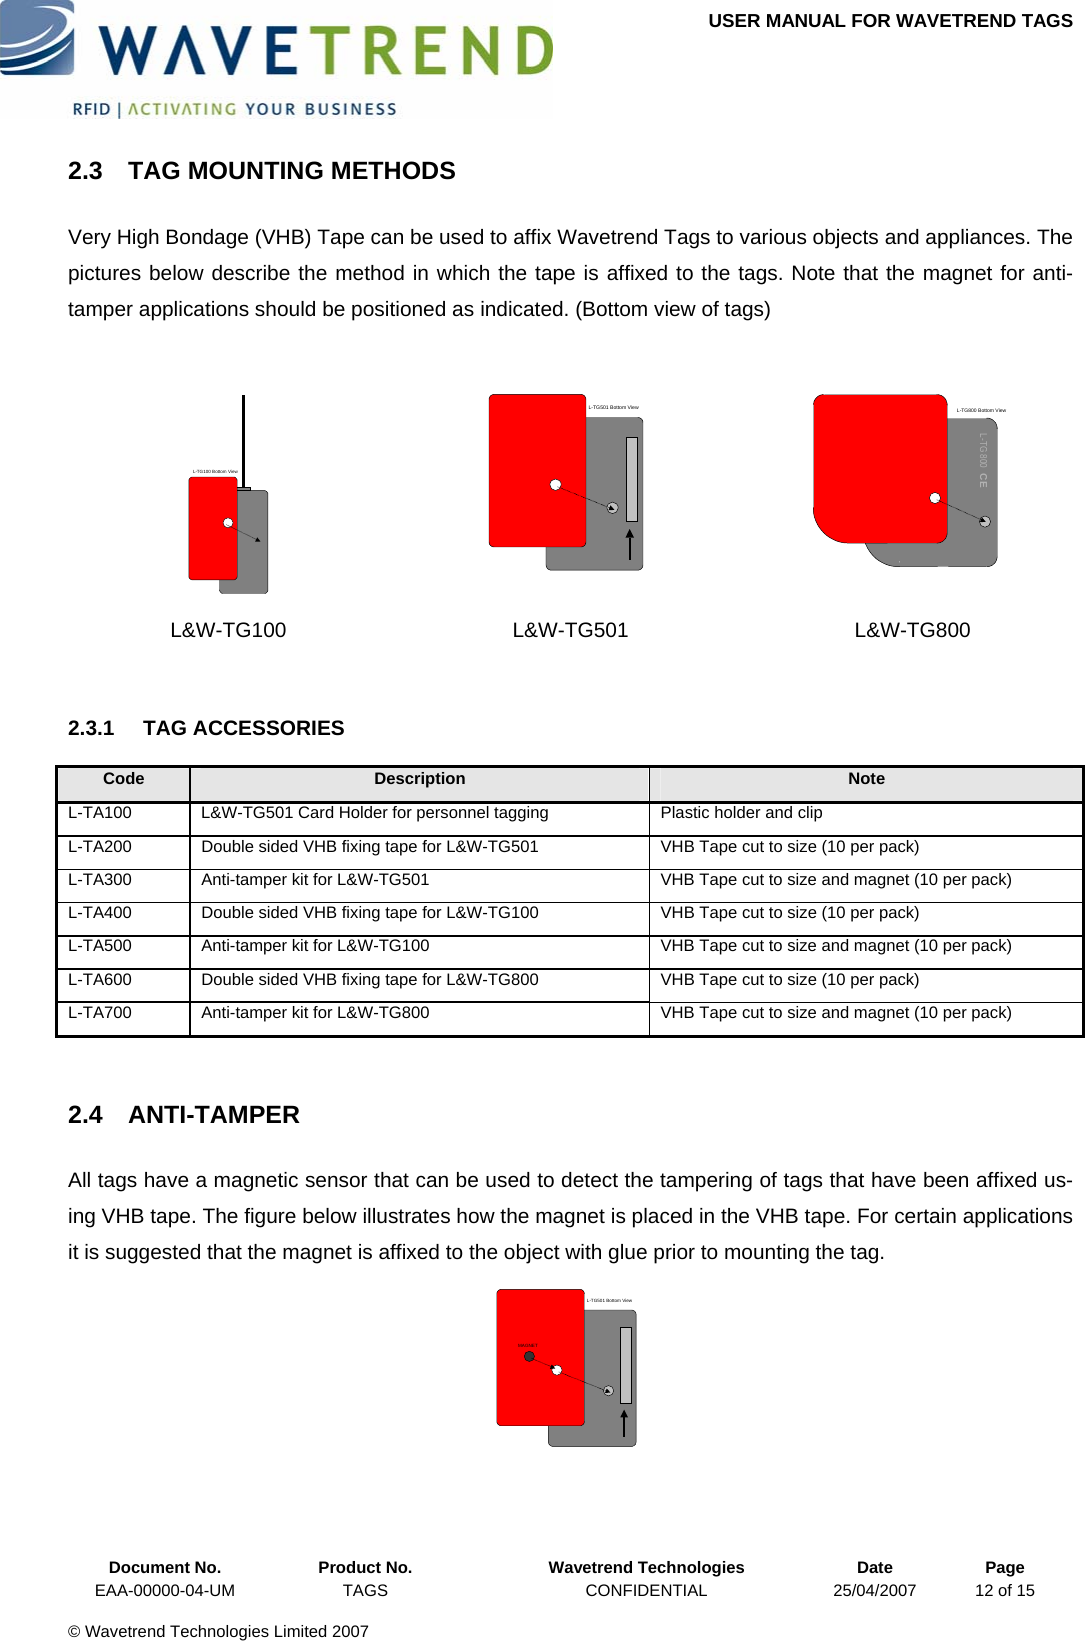 USER MANUAL FOR WAVETREND TAGS  2.3  TAG MOUNTING METHODS Very High Bondage (VHB) Tape can be used to affix Wavetrend Tags to various objects and appliances. The pictures below describe the method in which the tape is affixed to the tags. Note that the magnet for anti-tamper applications should be positioned as indicated. (Bottom view of tags)  L-TG100 Bottom View  L-TG501 Bottom View  L-TG 800  CEL-TG800 Bottom View L&amp;W-TG100 L&amp;W-TG501 L&amp;W-TG800  2.3.1 TAG ACCESSORIES Code  Description  Note L-TA100  L&amp;W-TG501 Card Holder for personnel tagging  Plastic holder and clip L-TA200  Double sided VHB fixing tape for L&amp;W-TG501   VHB Tape cut to size (10 per pack) L-TA300  Anti-tamper kit for L&amp;W-TG501  VHB Tape cut to size and magnet (10 per pack) L-TA400  Double sided VHB fixing tape for L&amp;W-TG100  VHB Tape cut to size (10 per pack) L-TA500  Anti-tamper kit for L&amp;W-TG100  VHB Tape cut to size and magnet (10 per pack) L-TA600  Double sided VHB fixing tape for L&amp;W-TG800  VHB Tape cut to size (10 per pack) L-TA700  Anti-tamper kit for L&amp;W-TG800  VHB Tape cut to size and magnet (10 per pack)  2.4 ANTI-TAMPER All tags have a magnetic sensor that can be used to detect the tampering of tags that have been affixed us-ing VHB tape. The figure below illustrates how the magnet is placed in the VHB tape. For certain applications it is suggested that the magnet is affixed to the object with glue prior to mounting the tag. L-TG501 Bottom ViewMAGNET  Document No.  Product No.  Wavetrend Technologies  Date  Page EAA-00000-04-UM  TAGS  CONFIDENTIAL  25/04/2007  12 of 15  © Wavetrend Technologies Limited 2007  